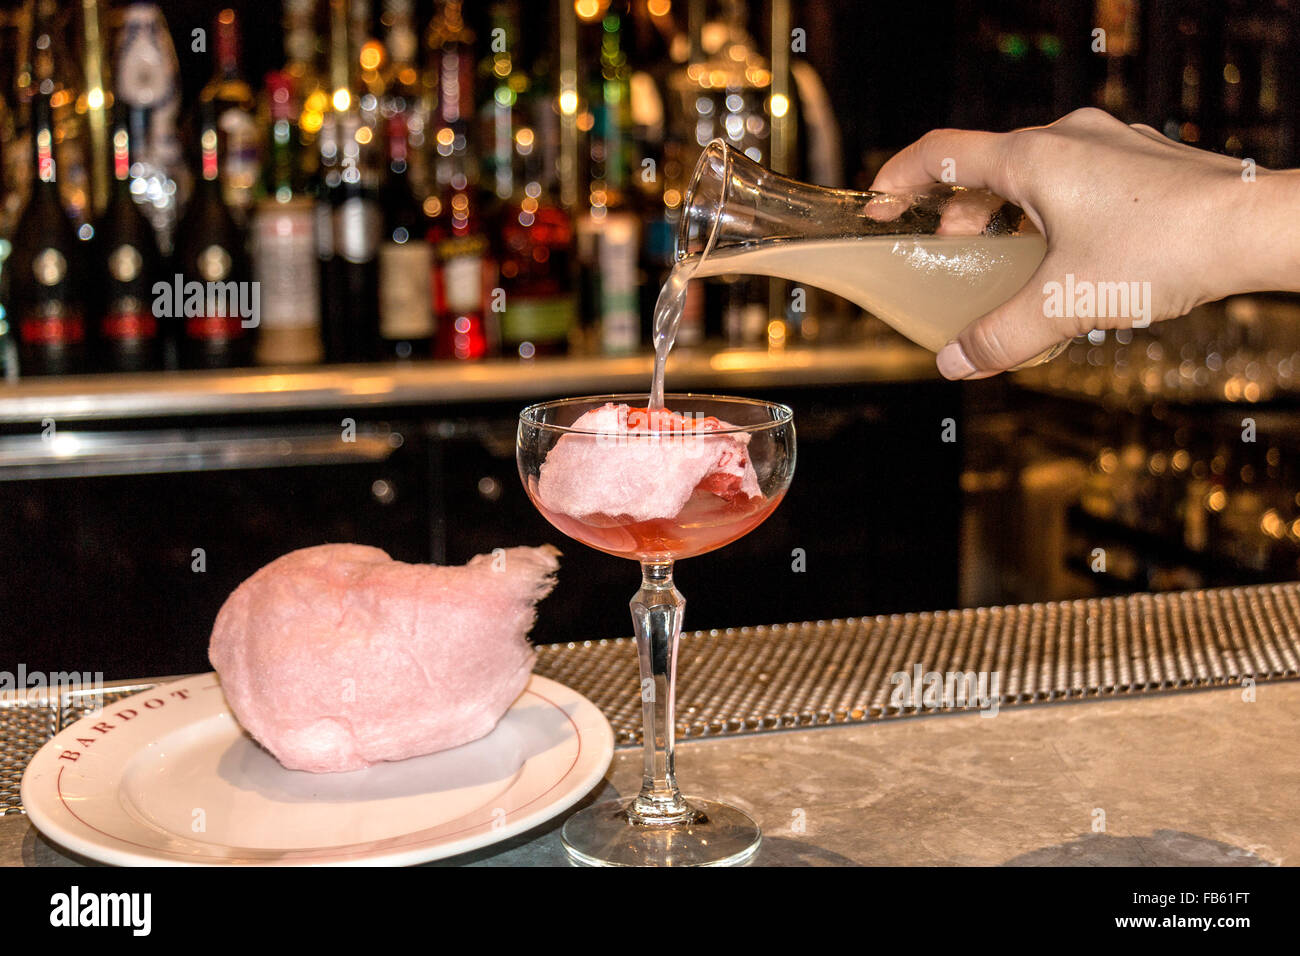 Demonstration of how to make a Pink Cashmere drink using a mix of juices and vodka poured over cotton candy. Stock Photo